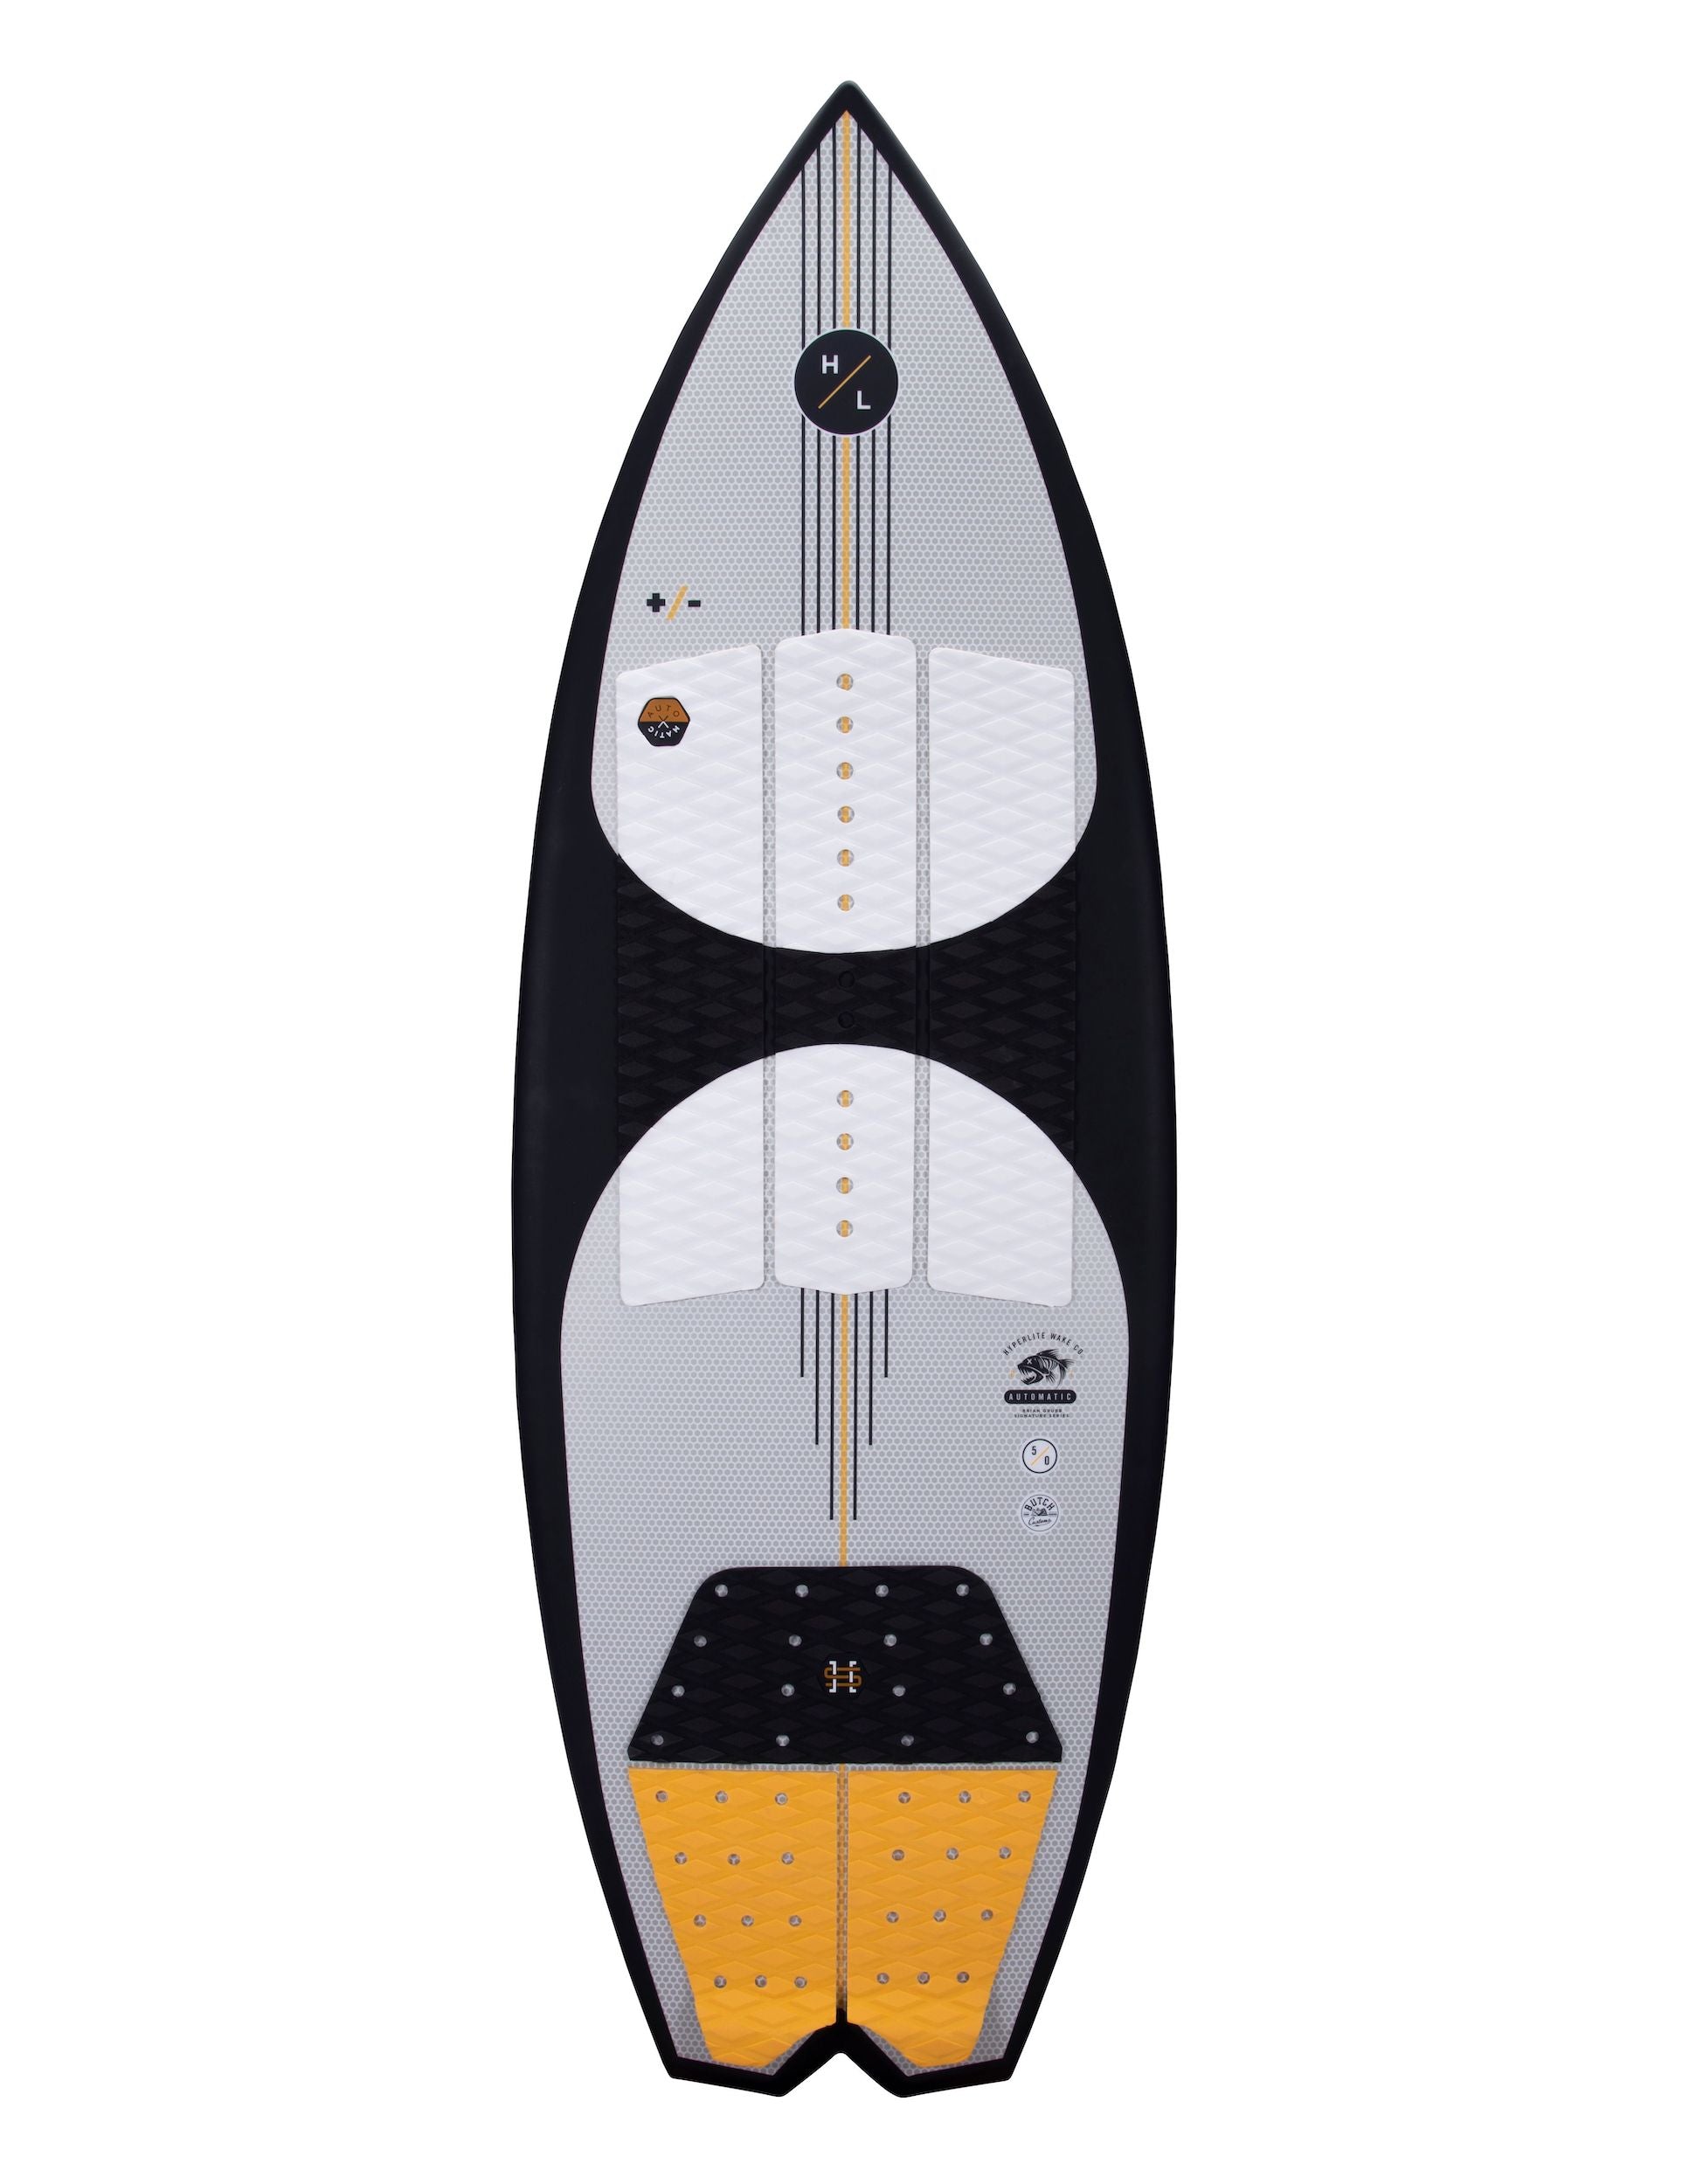 A Hyperlite 2023 Automatic Wakesurf Board with an orange and black design featuring DuraShell Construction.